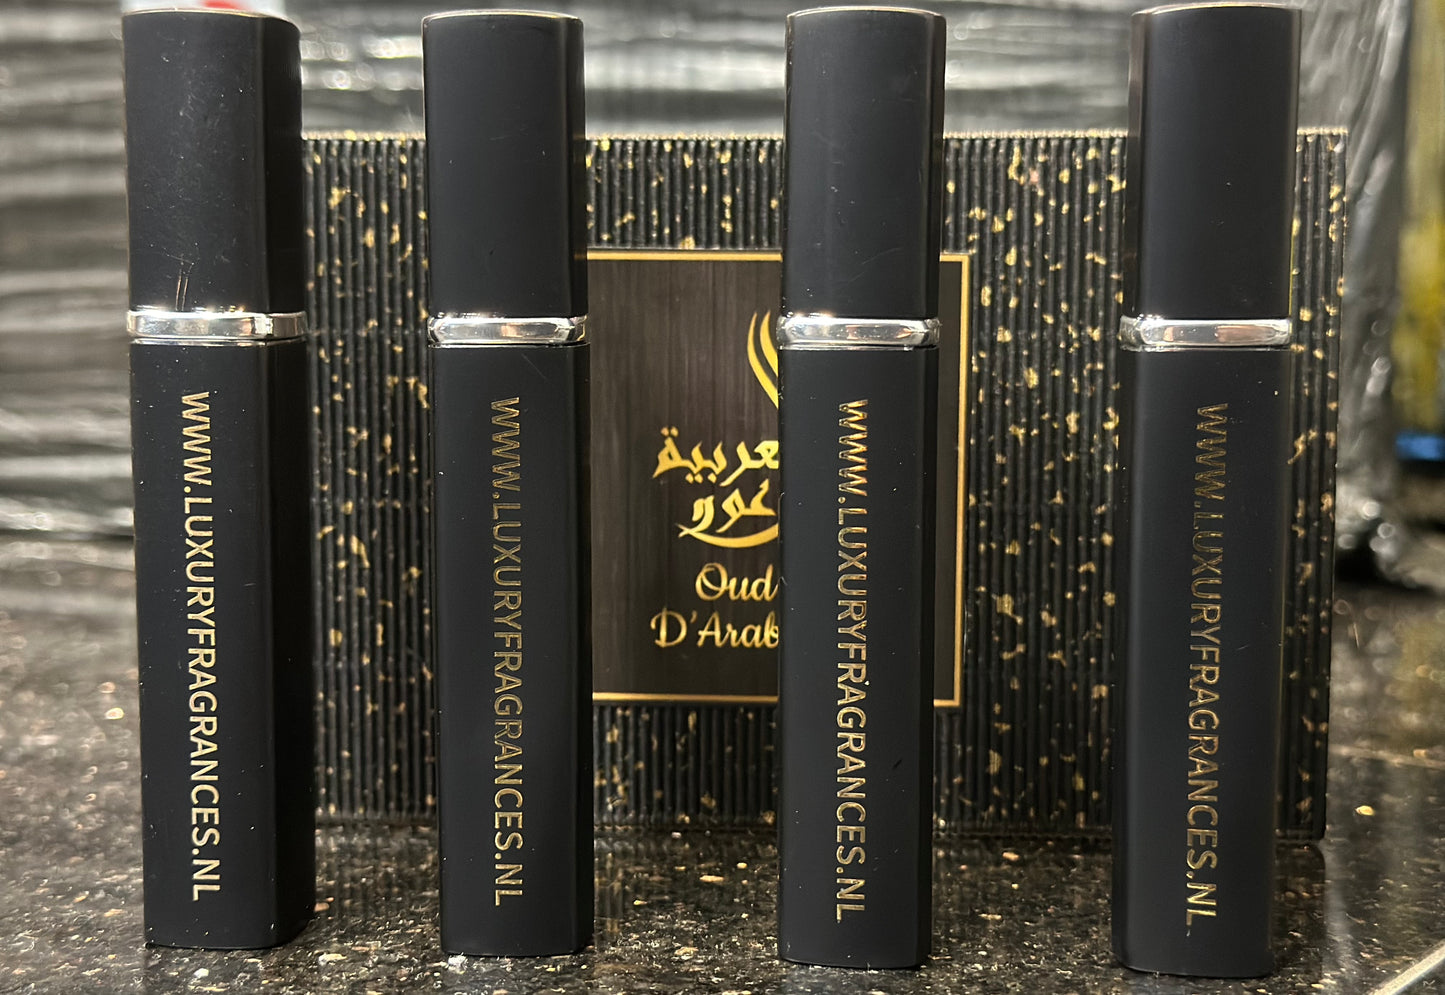 Montal* / Mancer* - Oud d'Arabia Discovery Set Collection - Kies 4 voor € 49,95